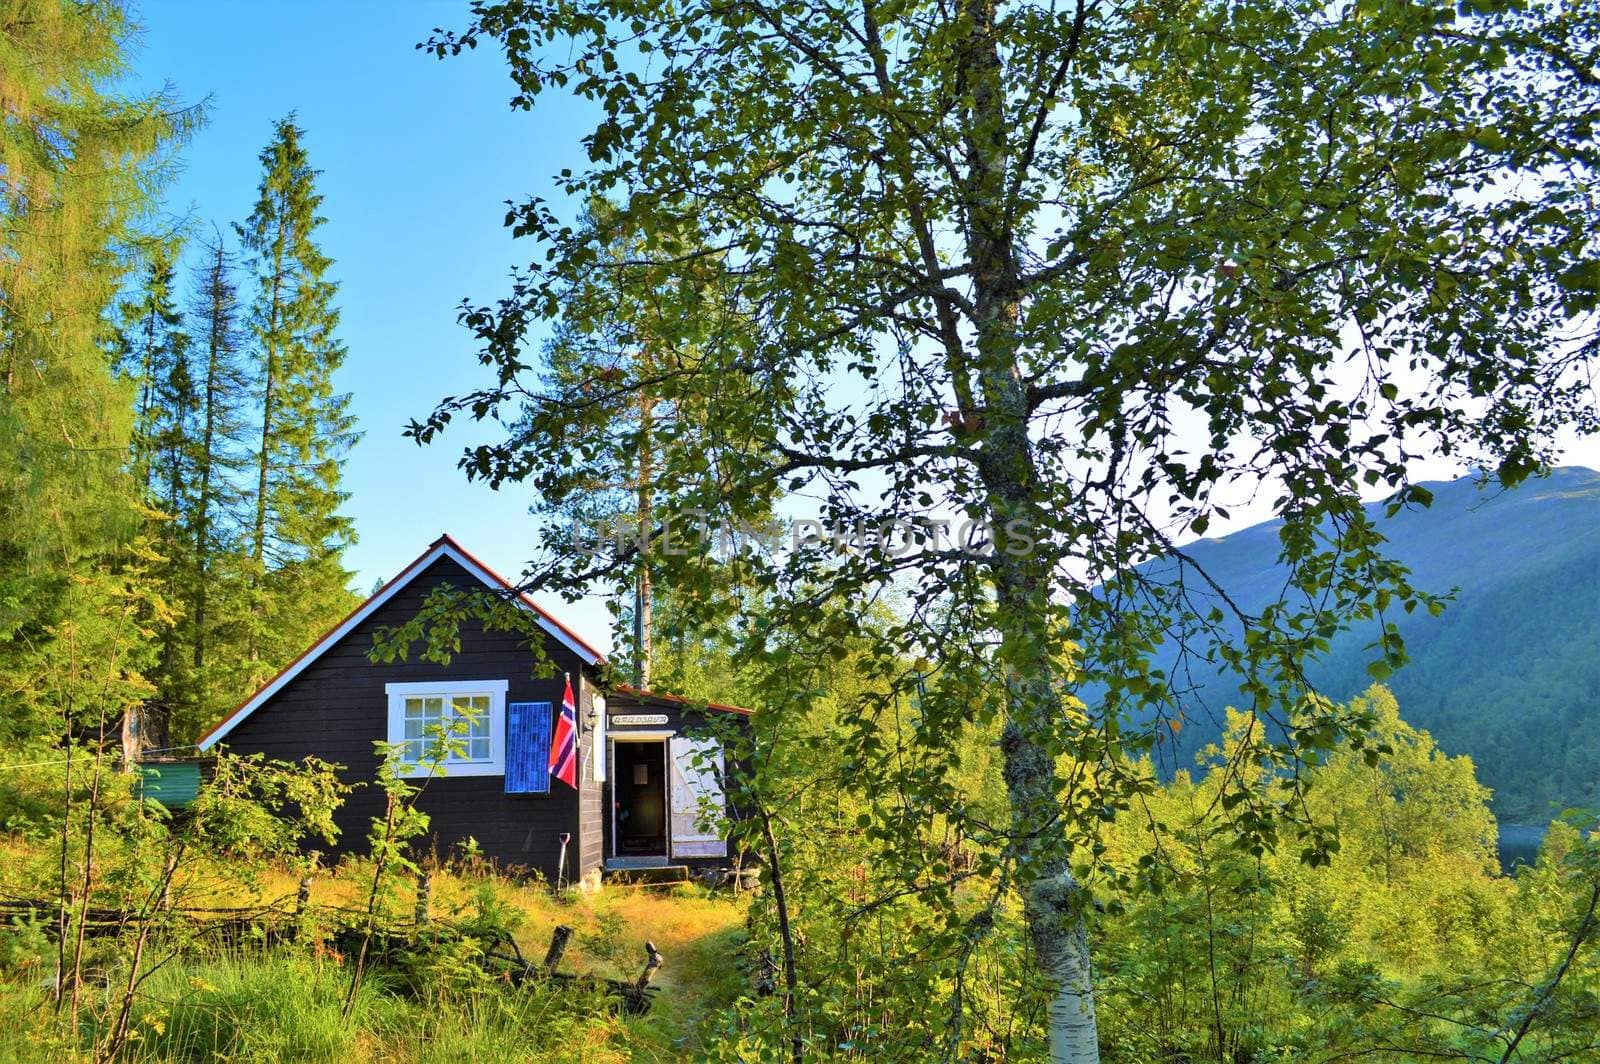 An image of a cabin in beautiful countryside from Norway's west coast, close to the town of Molde.